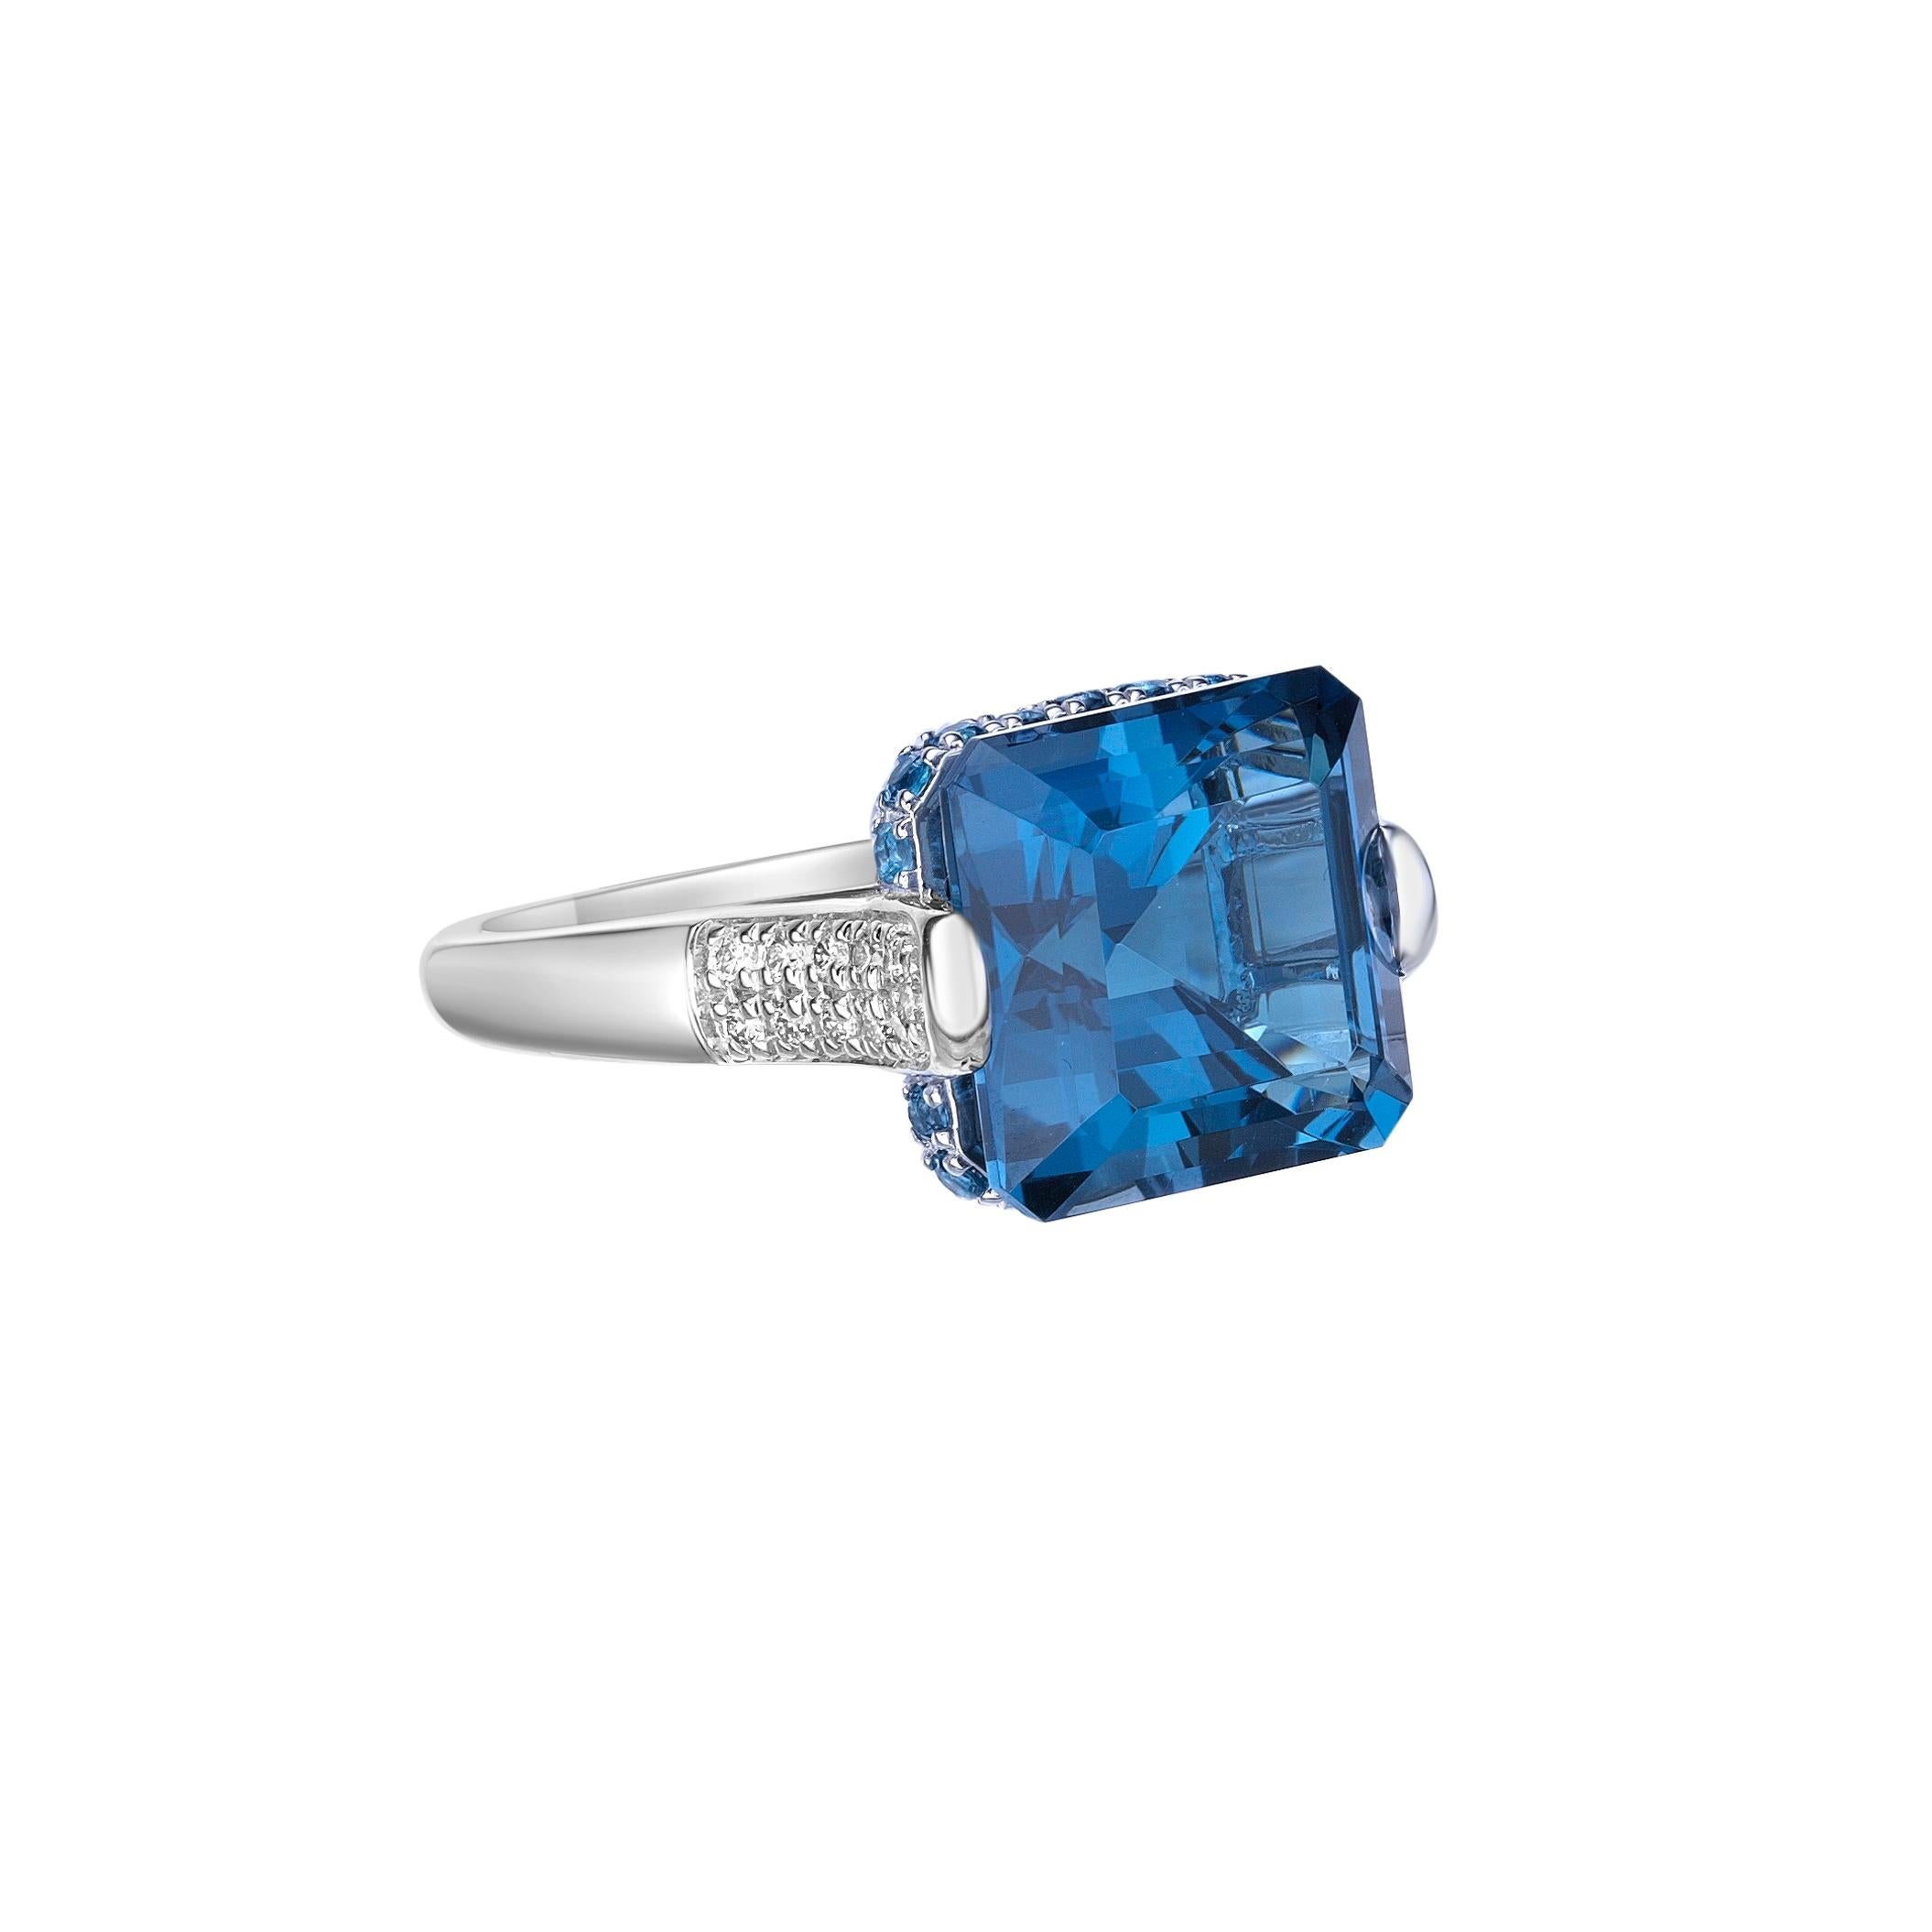 Contemporary 10.59 Carat London Blue Topaz Fancy Ring in 18KWG with White Diamond. For Sale